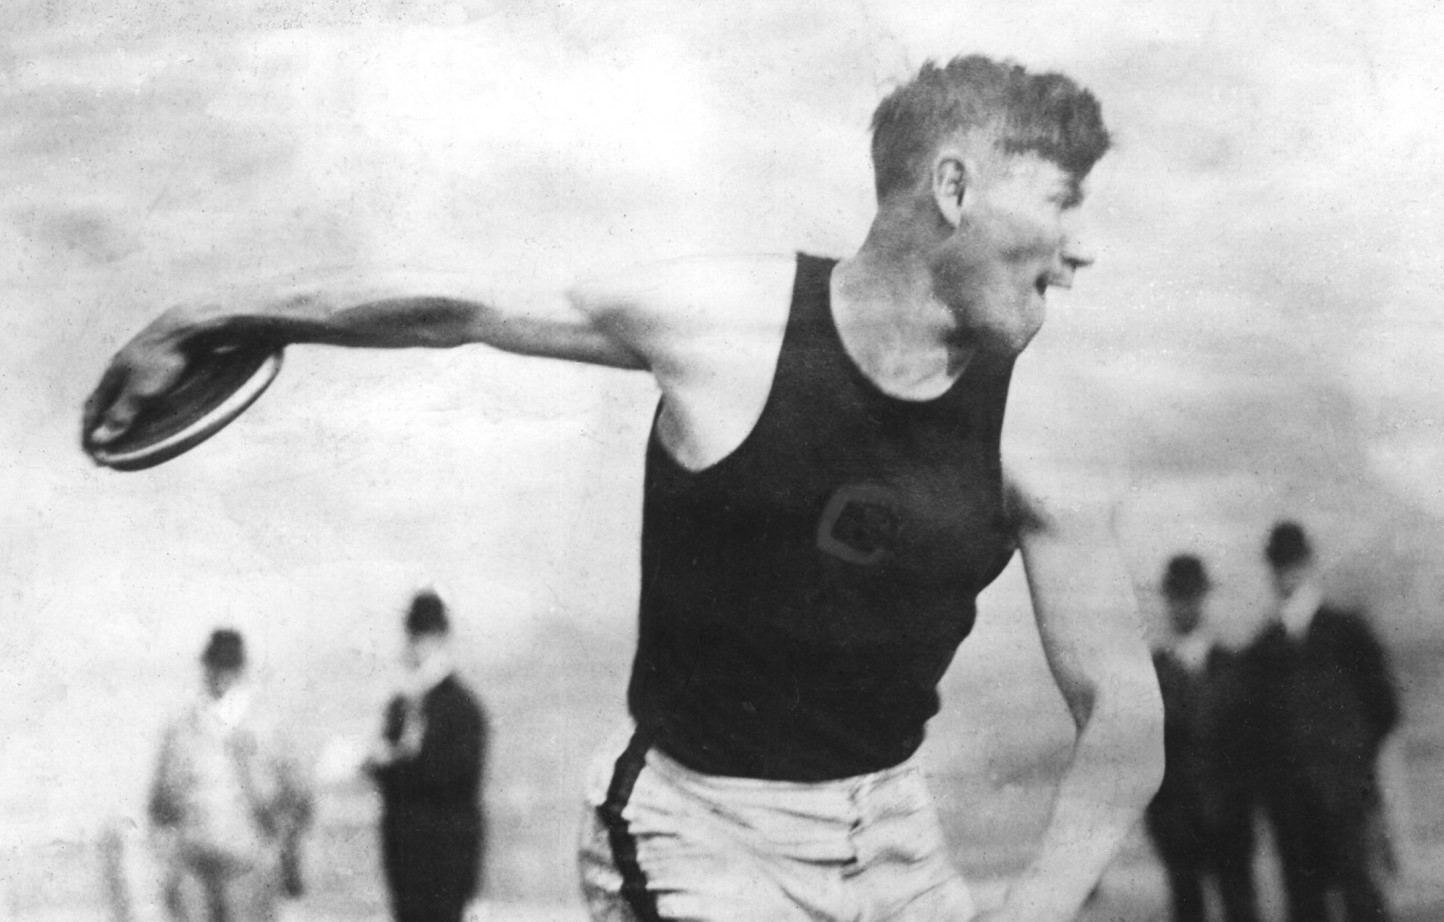 Thorpe finally recognised as sole 1912 Olympic pentathlon and decathlon gold medallist